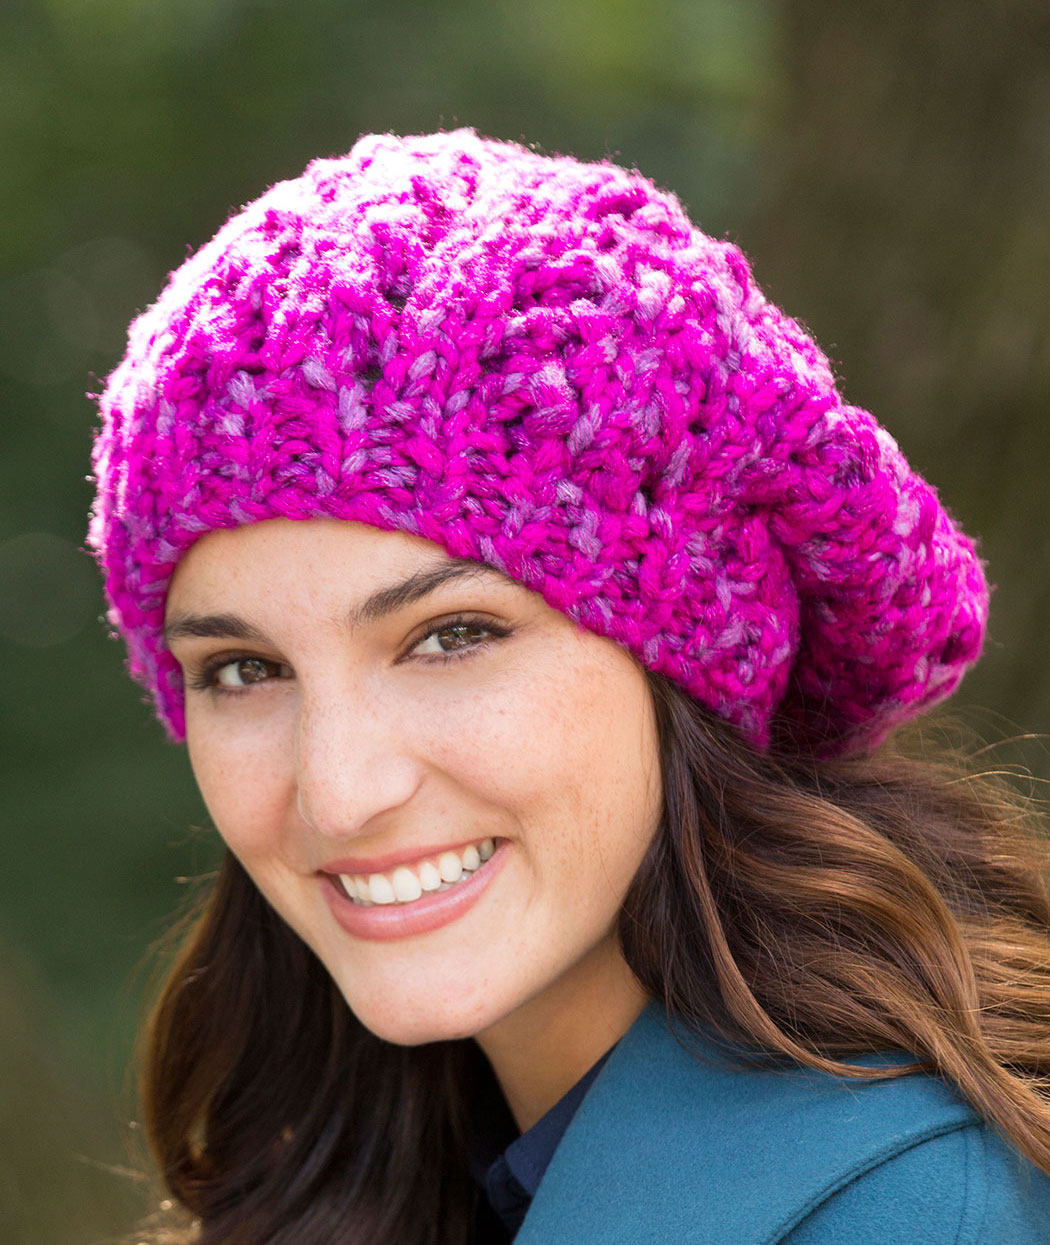 How to Knit a Slouchy Hat